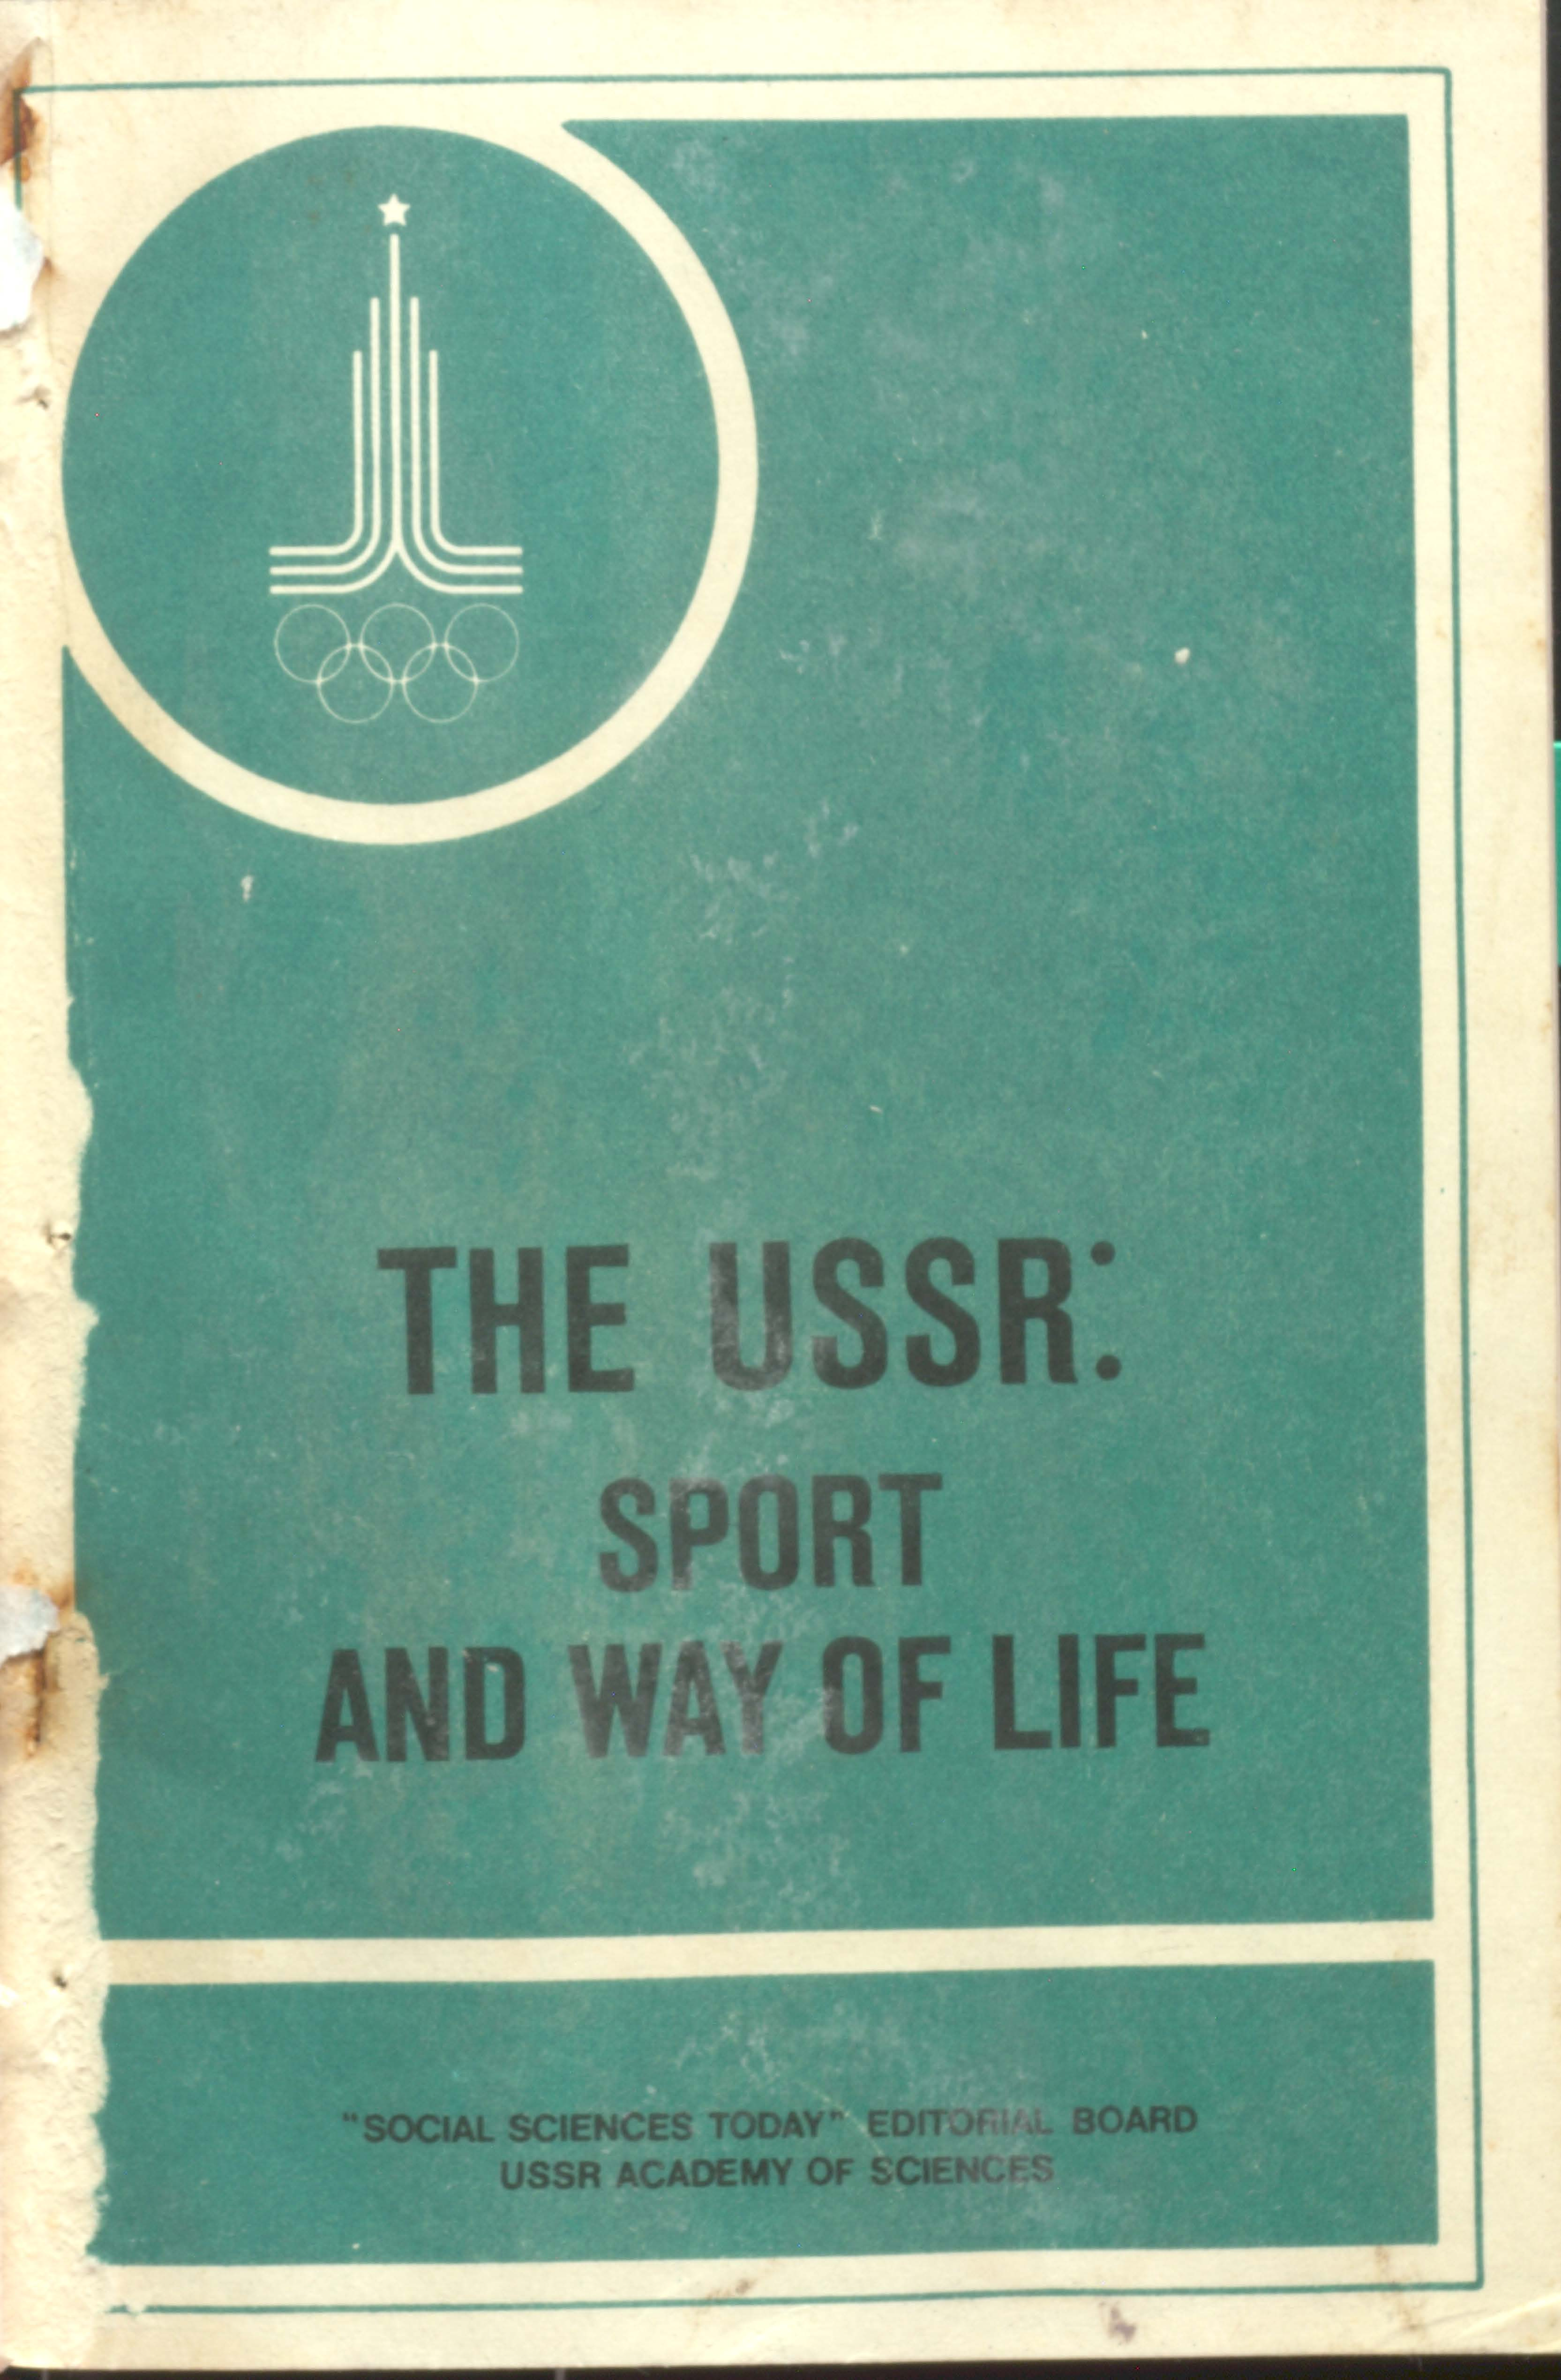 The USSR Sport and Way of Life